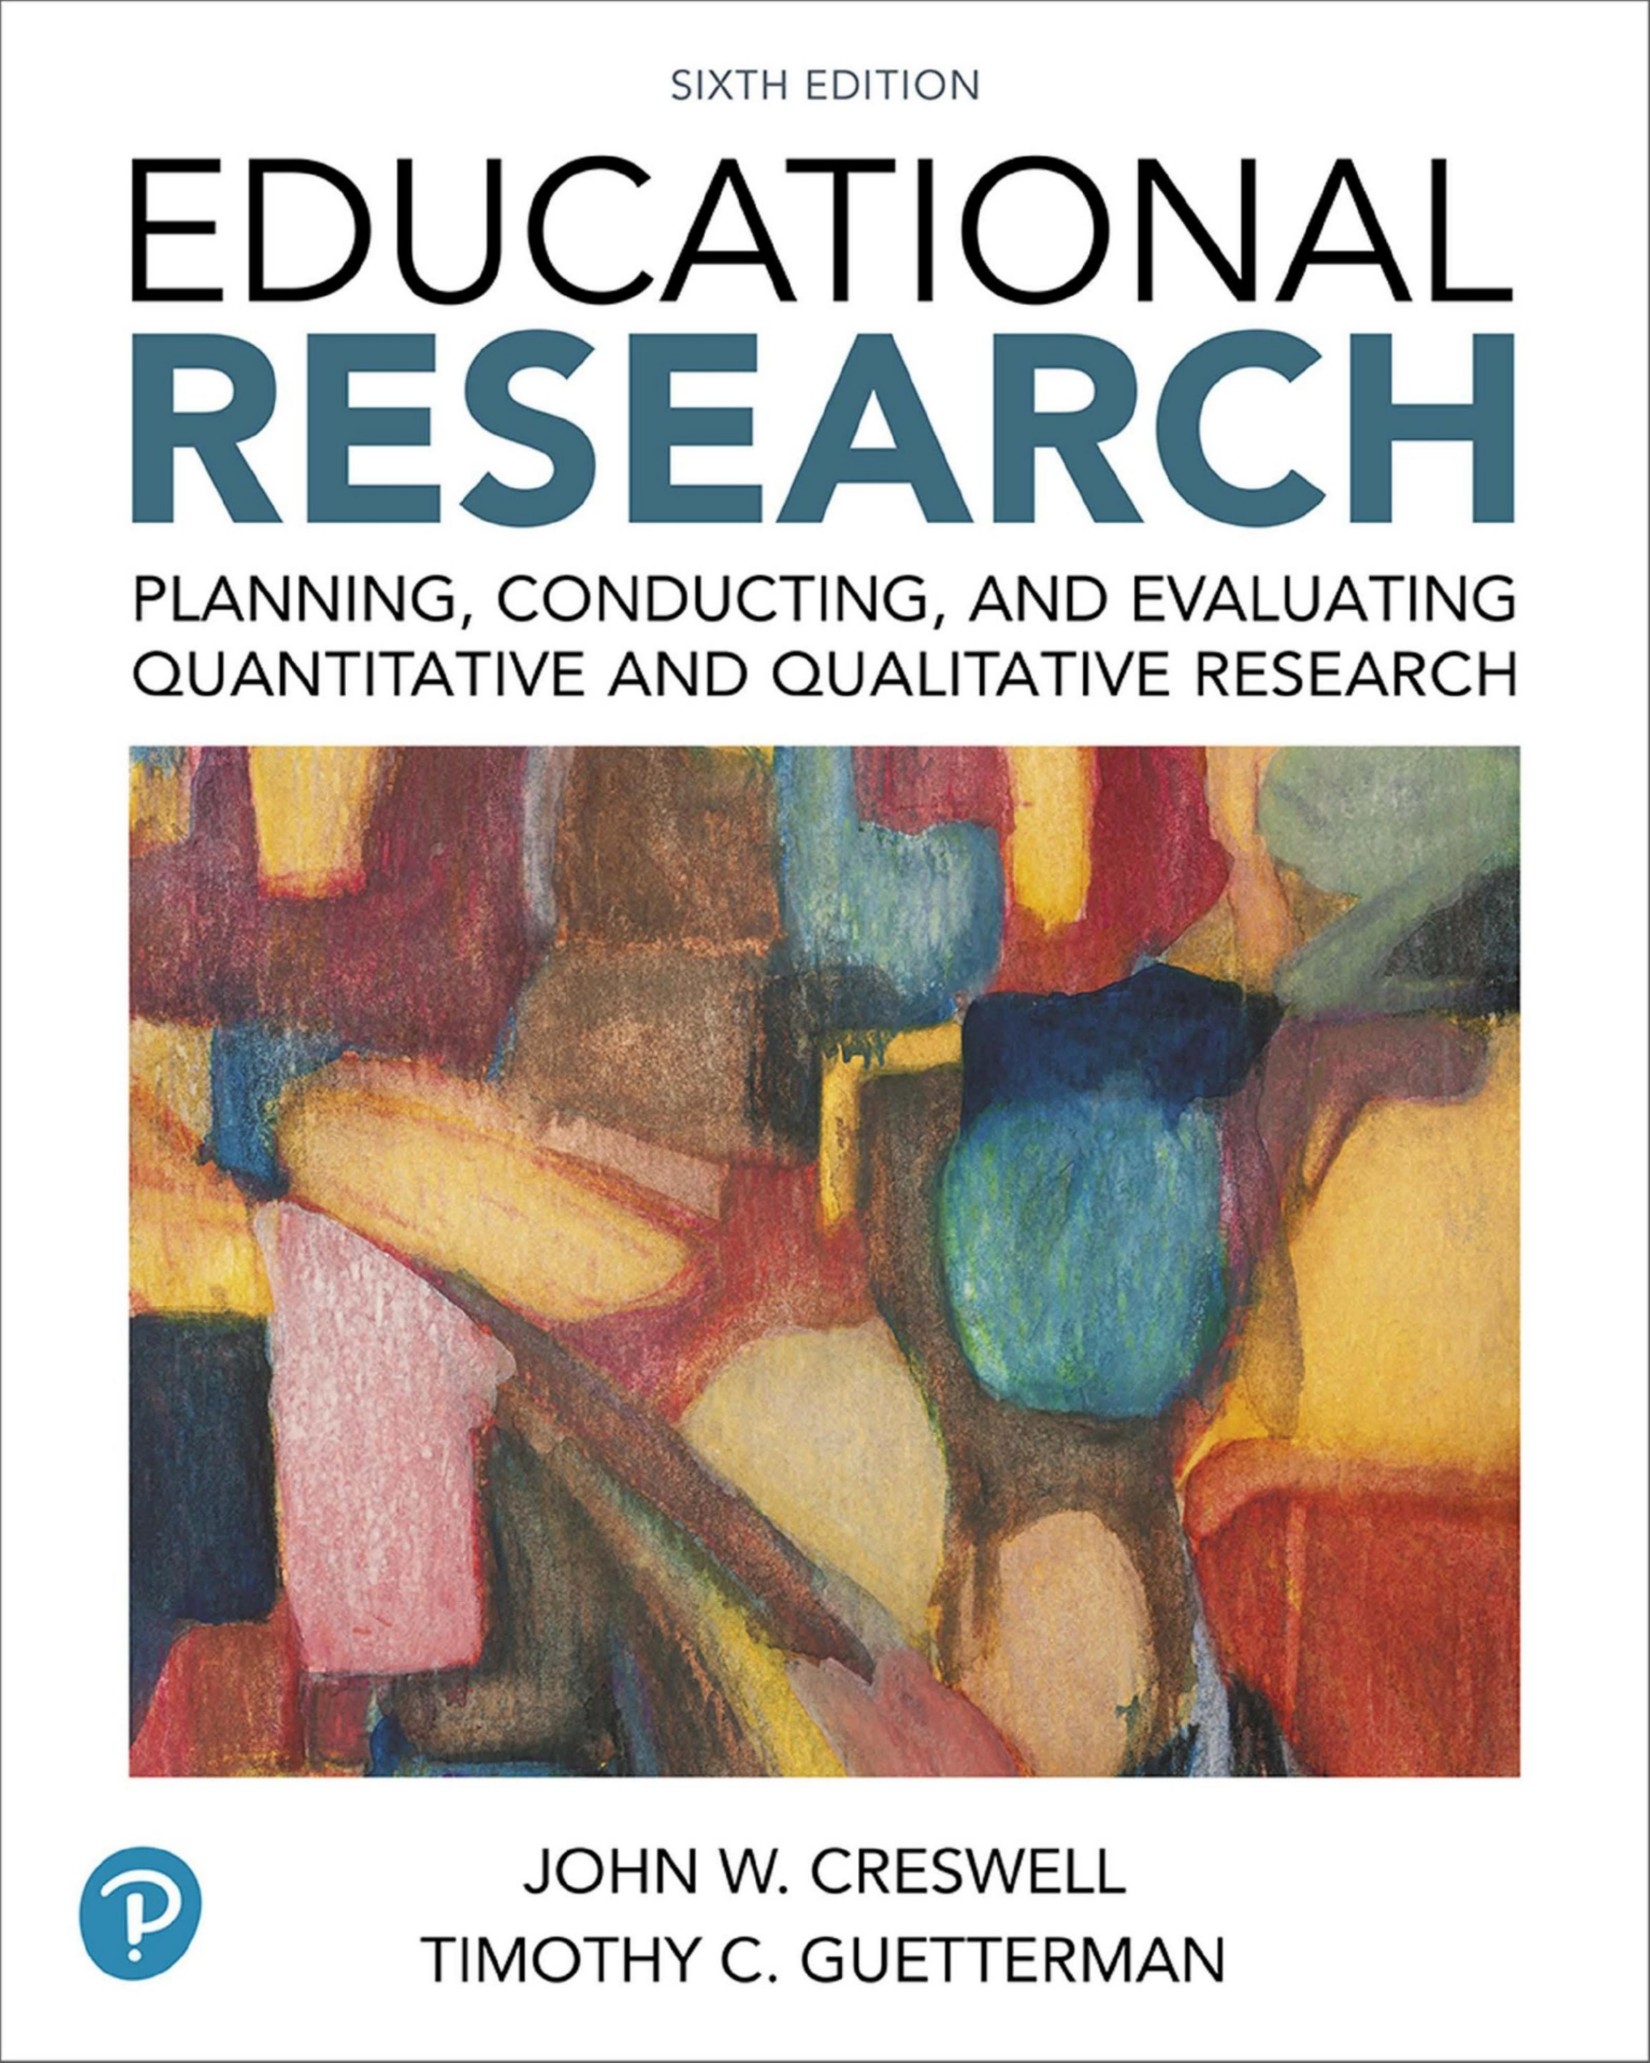 (eBook PDF)Educational Research 6th Edition by John W. Creswell